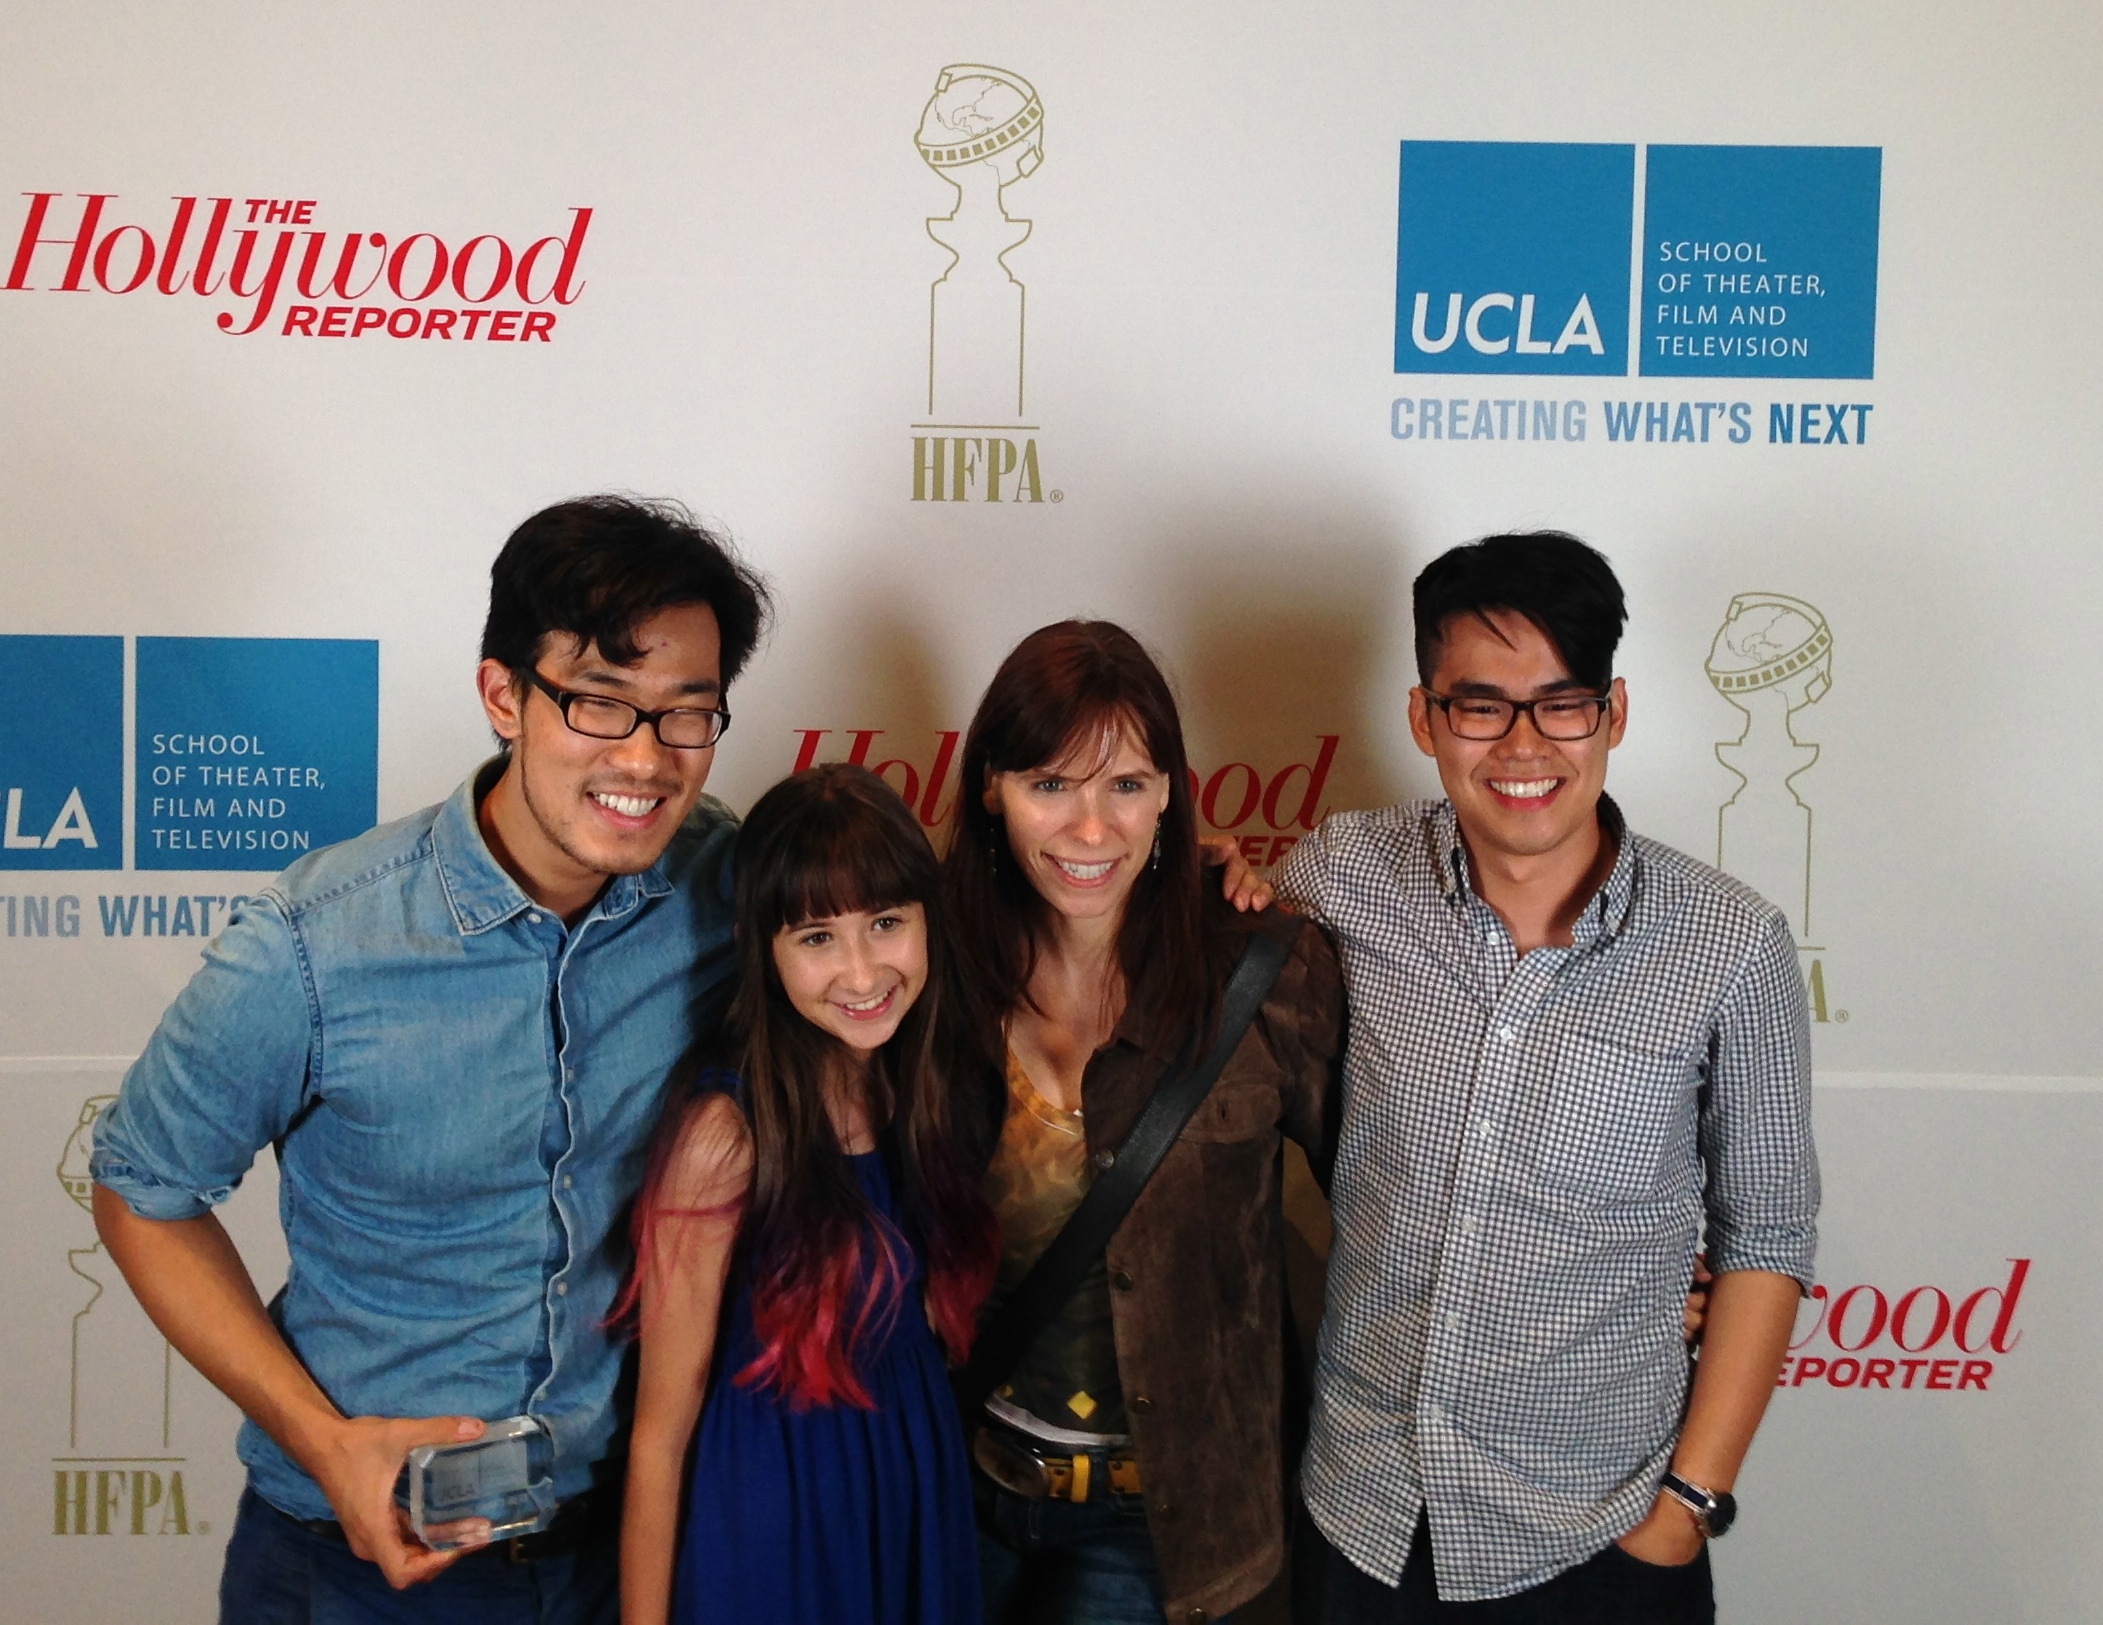 Lauren Reel, Ted Sim, Director, and Deidre Lyons at the red carpet event for Her Name Is Clover